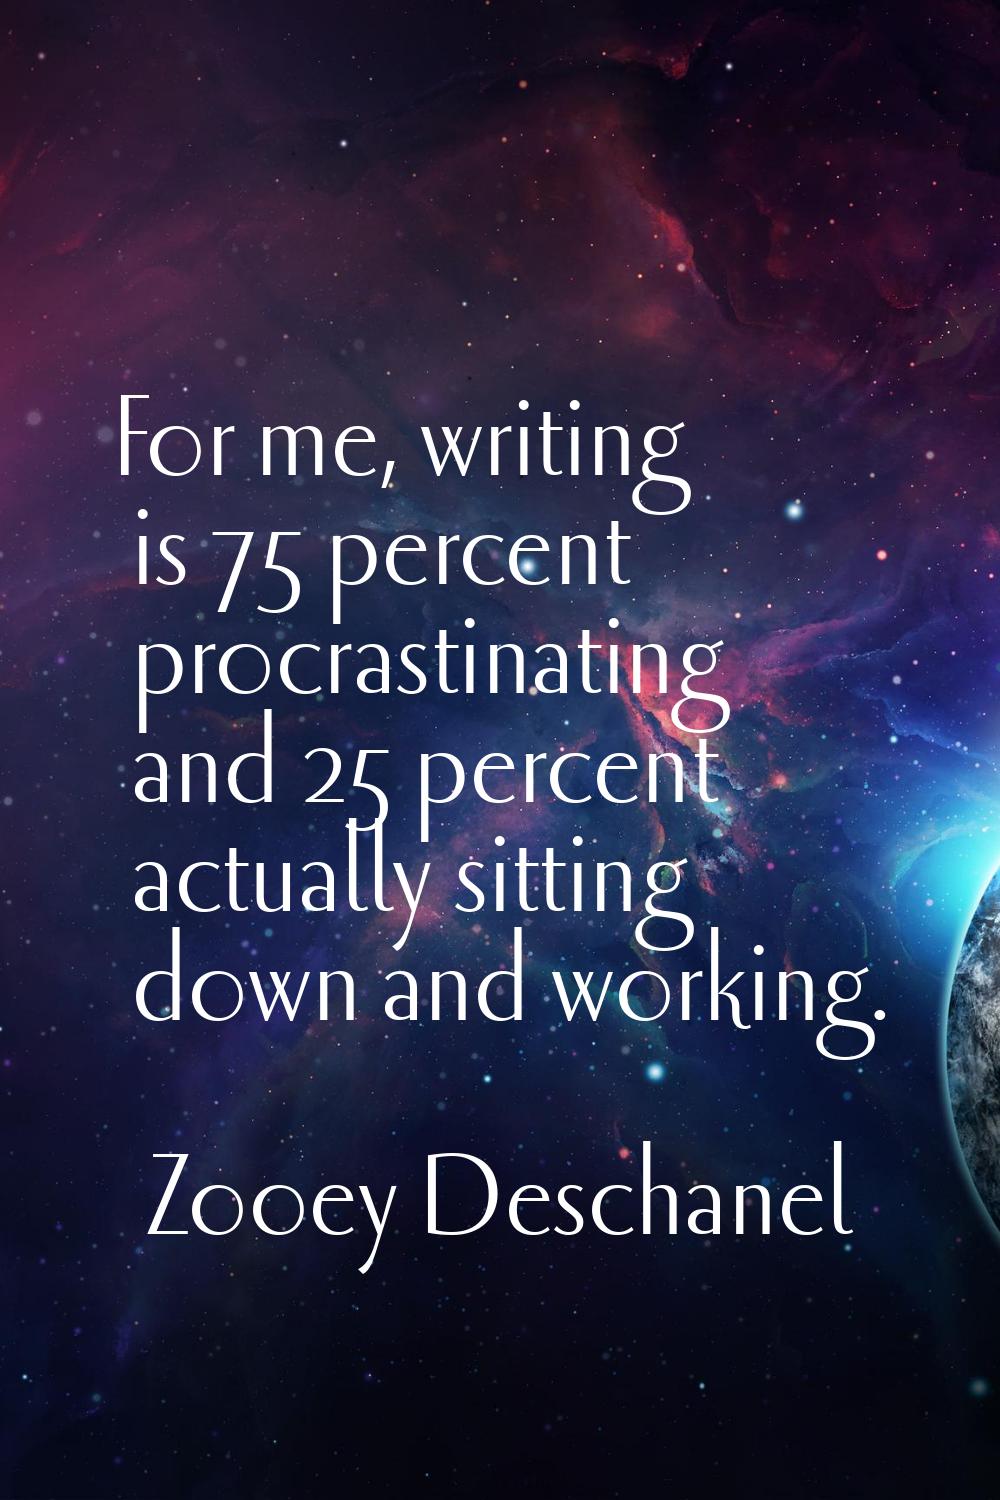 For me, writing is 75 percent procrastinating and 25 percent actually sitting down and working.